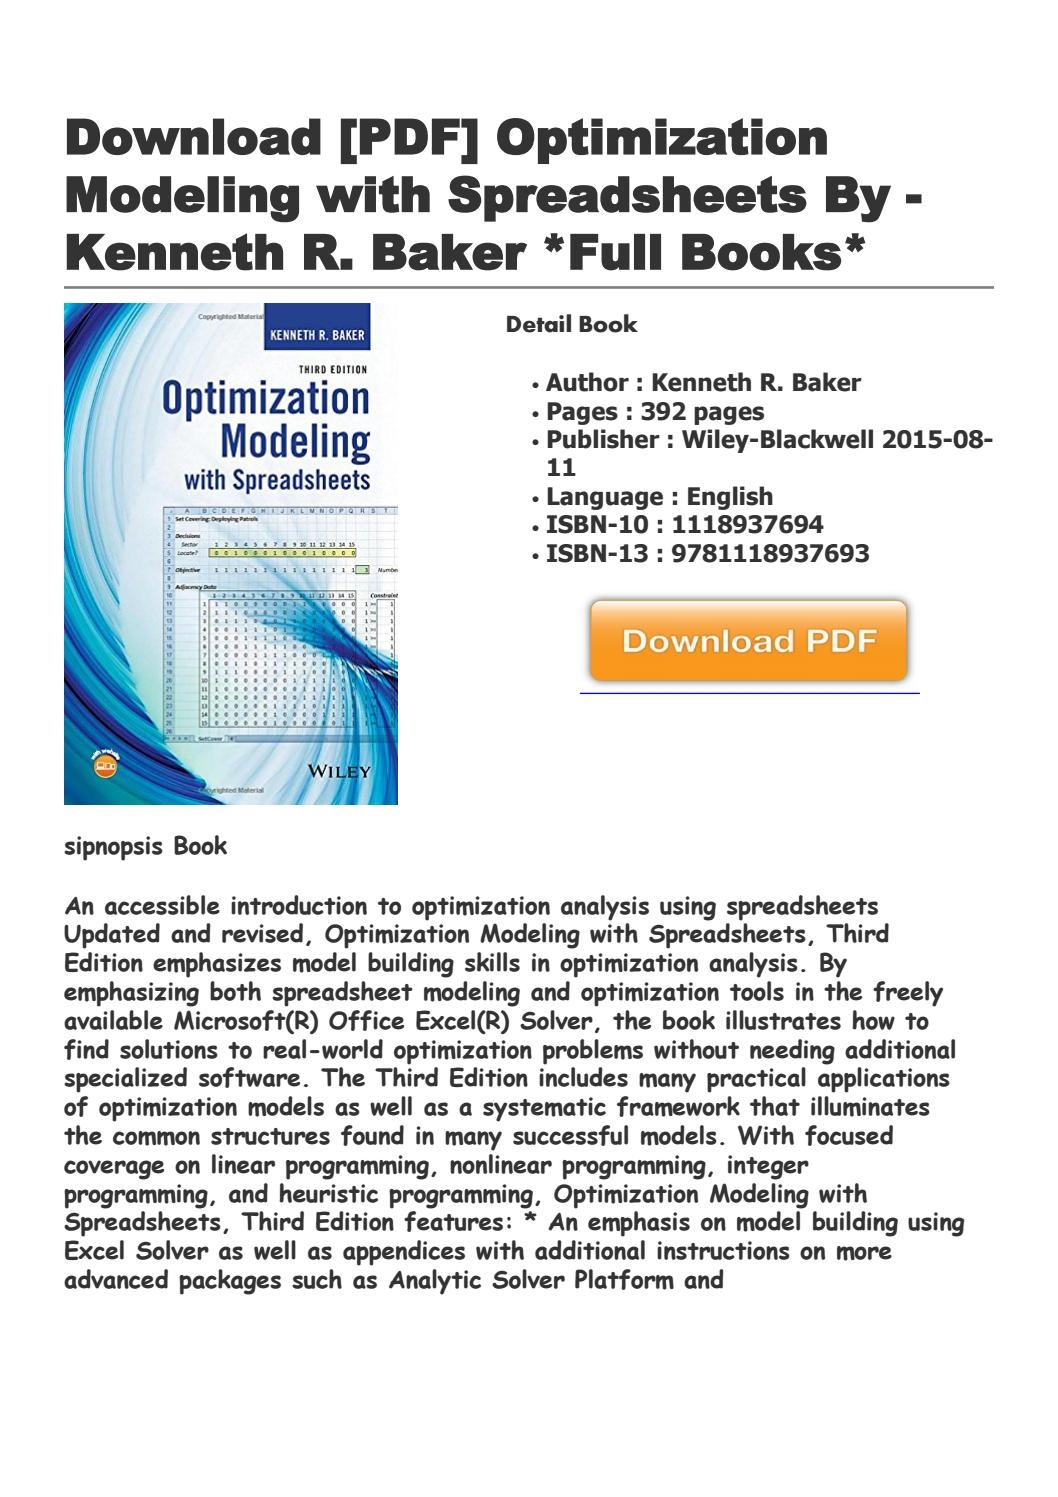 Optimization Modeling With Spreadsheets 3Rd Edition Pdf Throughout Download [Pdf] Optimization Modeling With Spreadsheets Kenneth